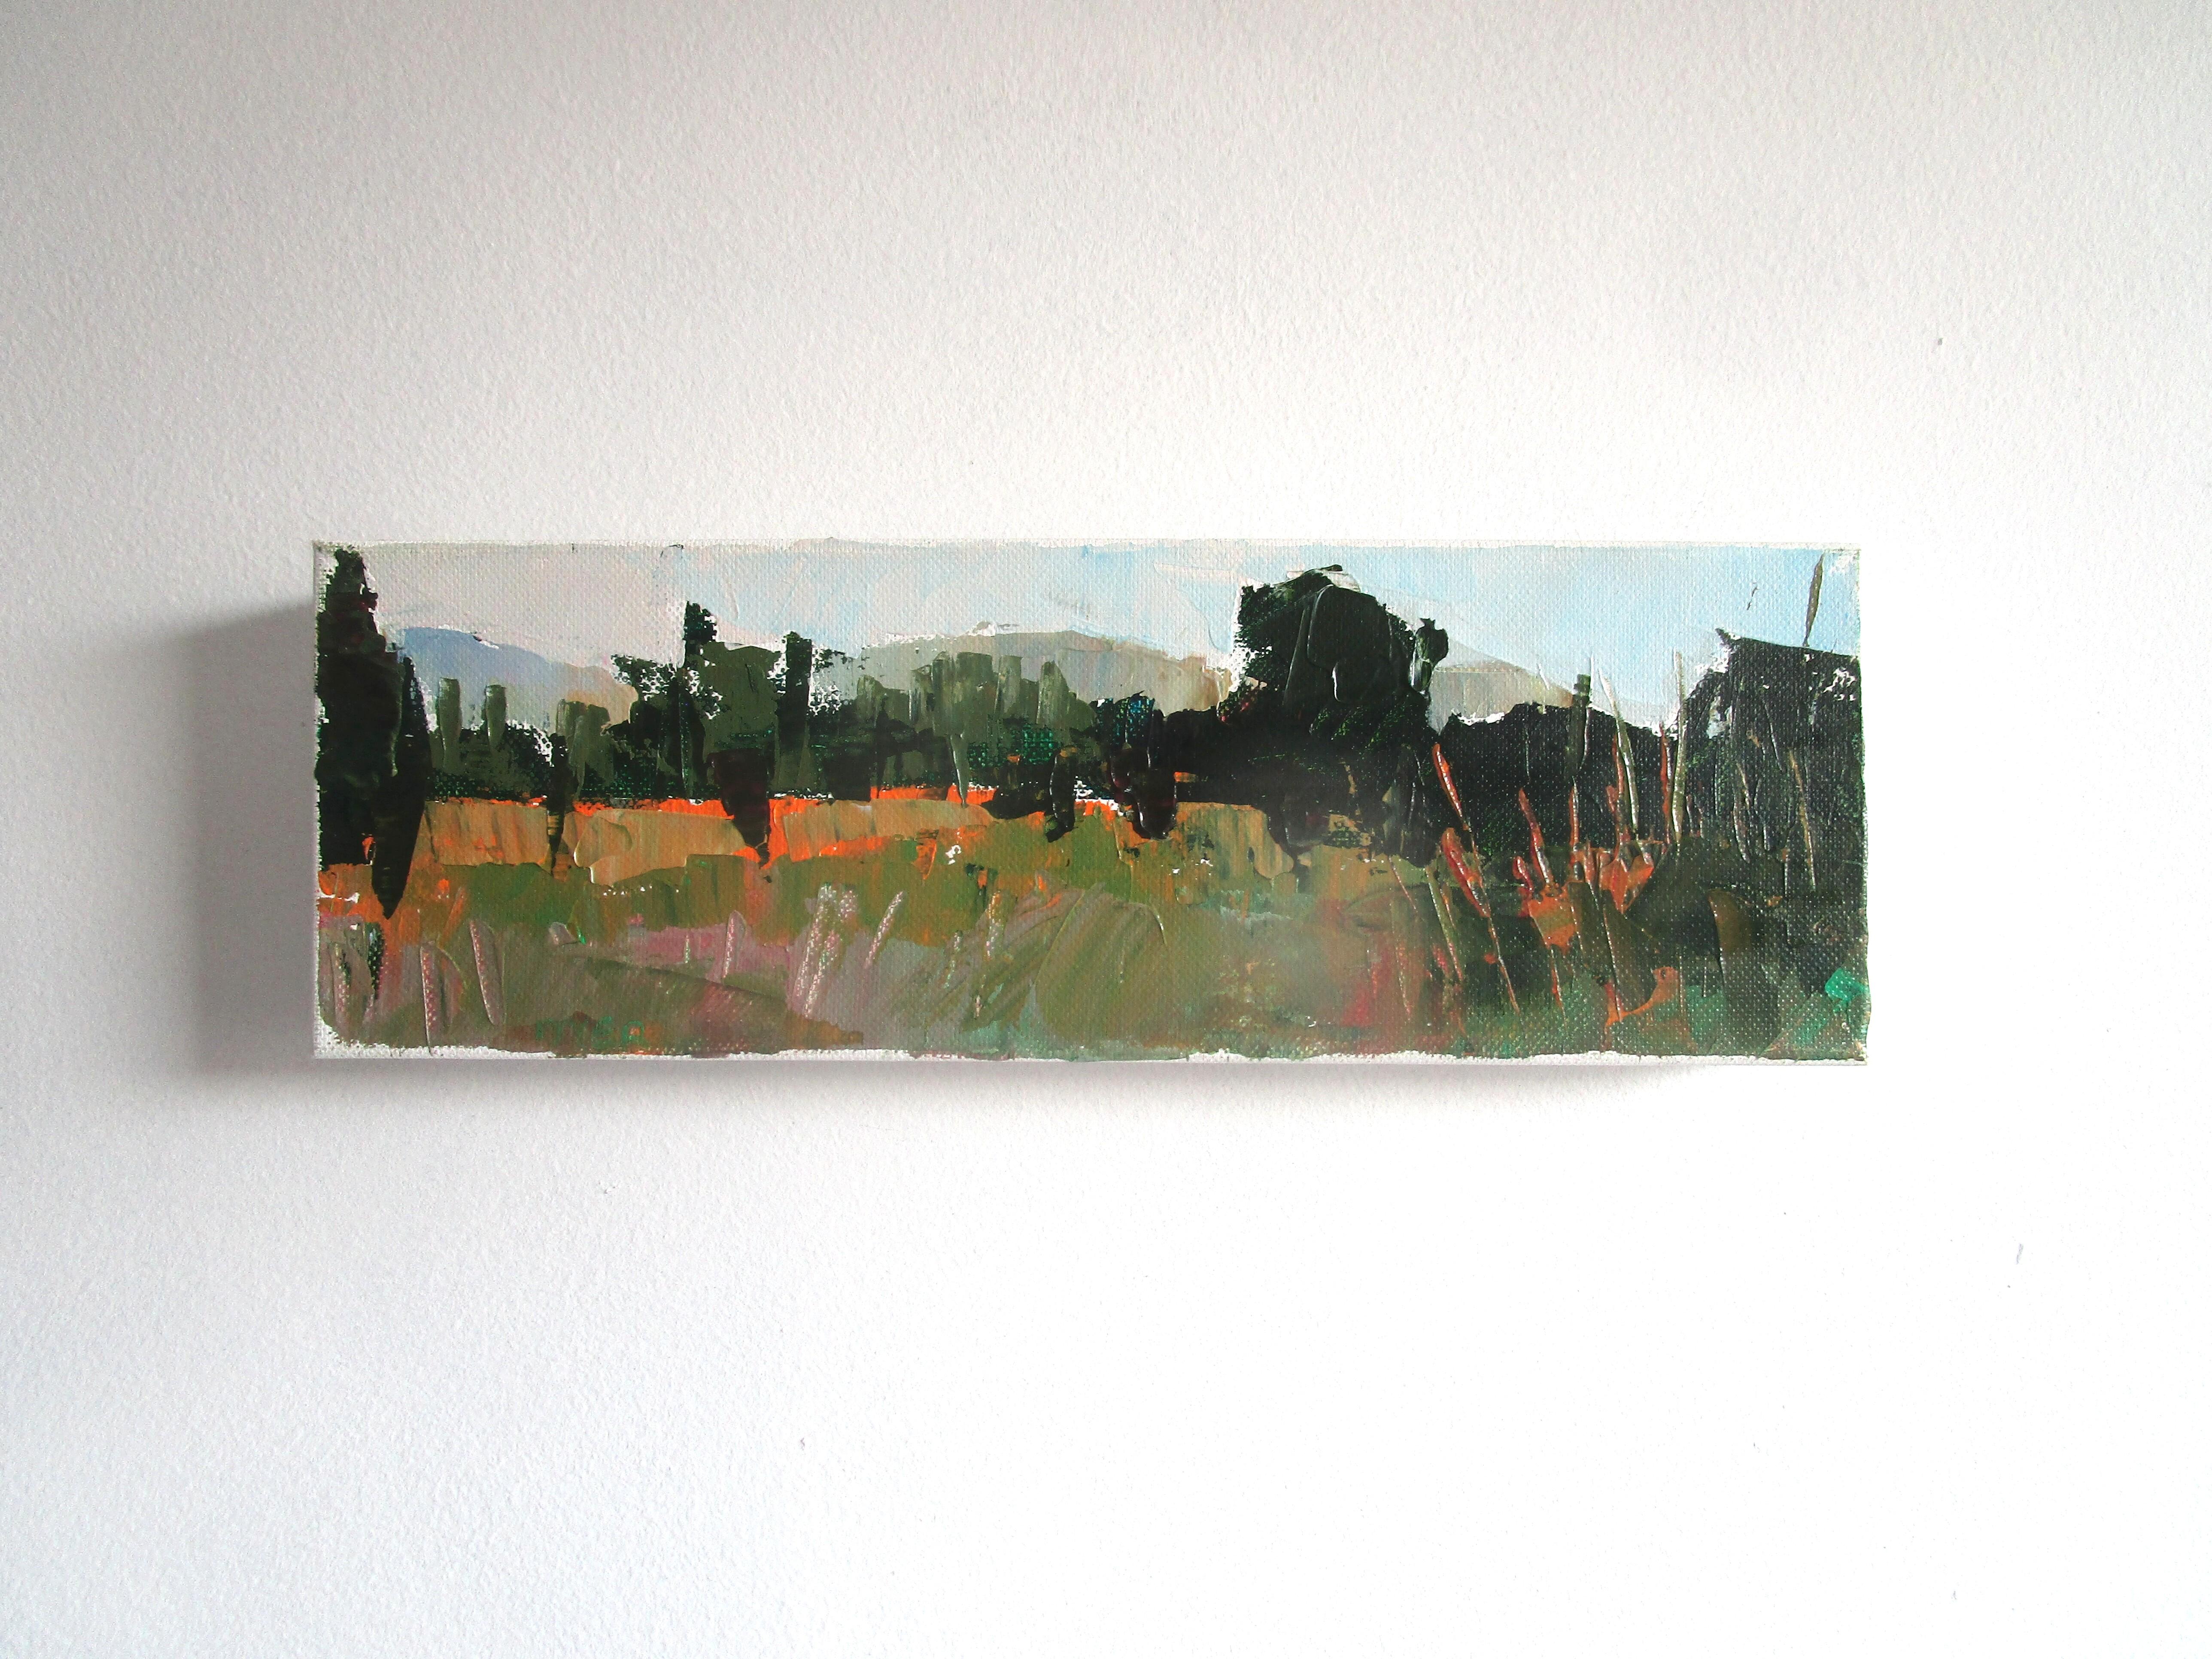 <p>Artist Comments<br />Artist Janet Dyer shows a verdant landscape in Provence near the home of her good friend. Mountains tower in the distance creating a striking panoramic view. Her abstract approach captures the energy of the image rather than